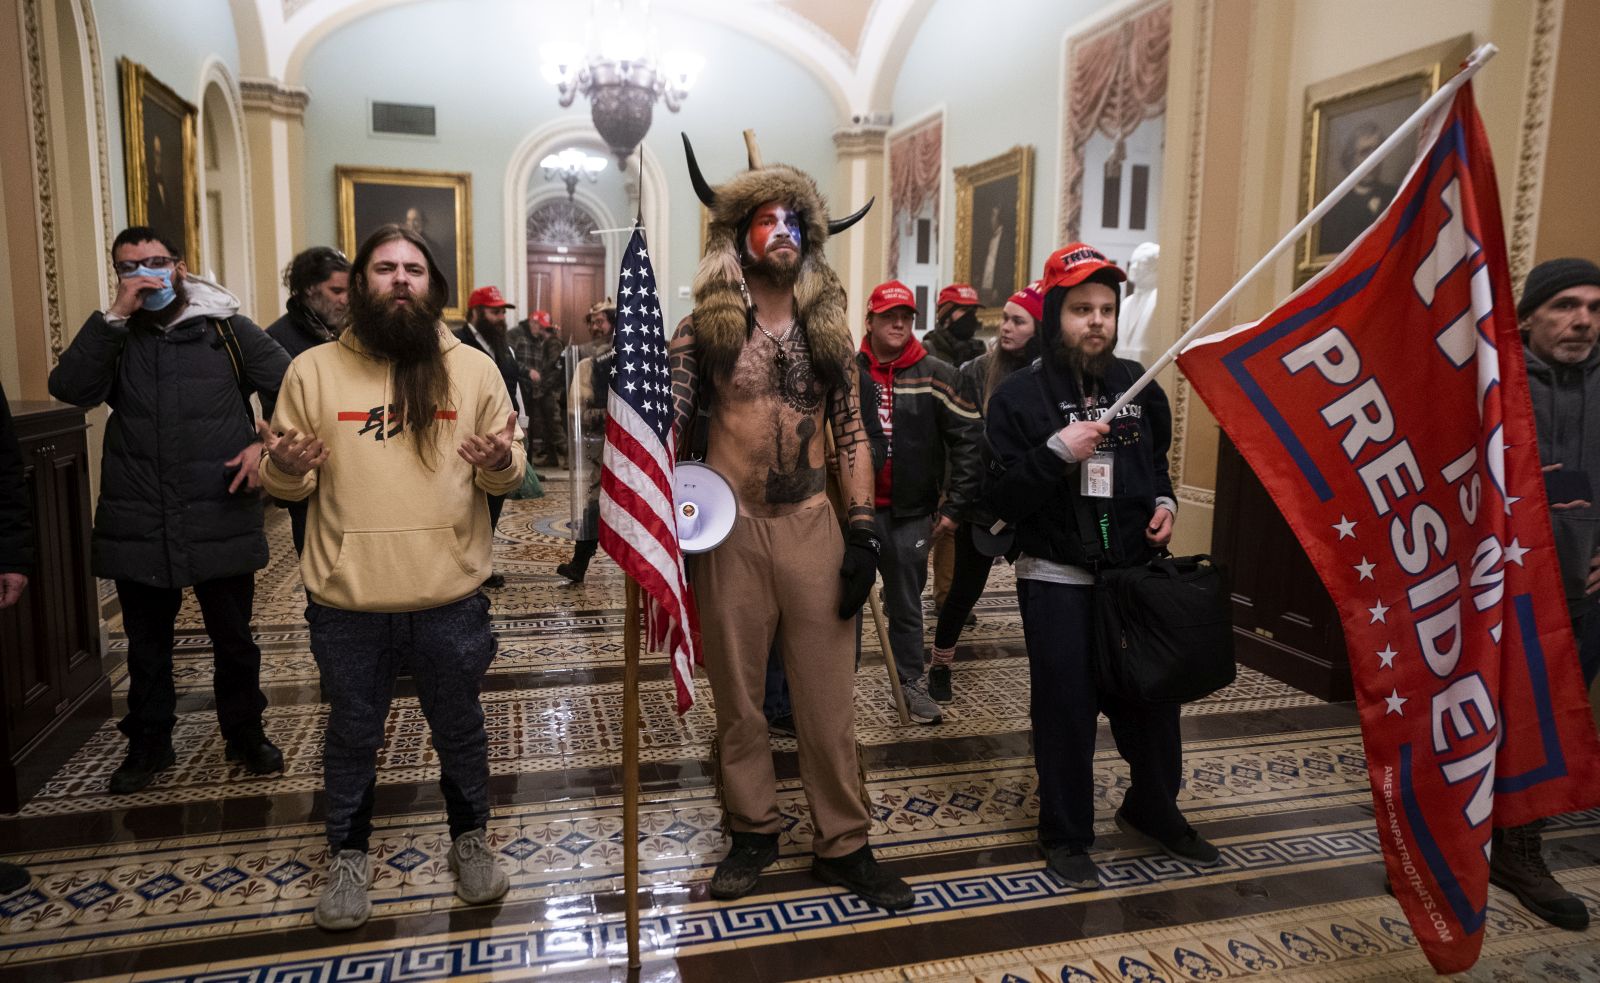 epa08923457 Supporters of US President Donald J. Trump stand by the door to the Senate chambers after they breached the US Capitol security in Washington, DC, USA, 06 January 2021. Protesters stormed the US Capitol where the Electoral College vote certification for President-elect Joe Biden took place.  EPA/JIM LO SCALZO